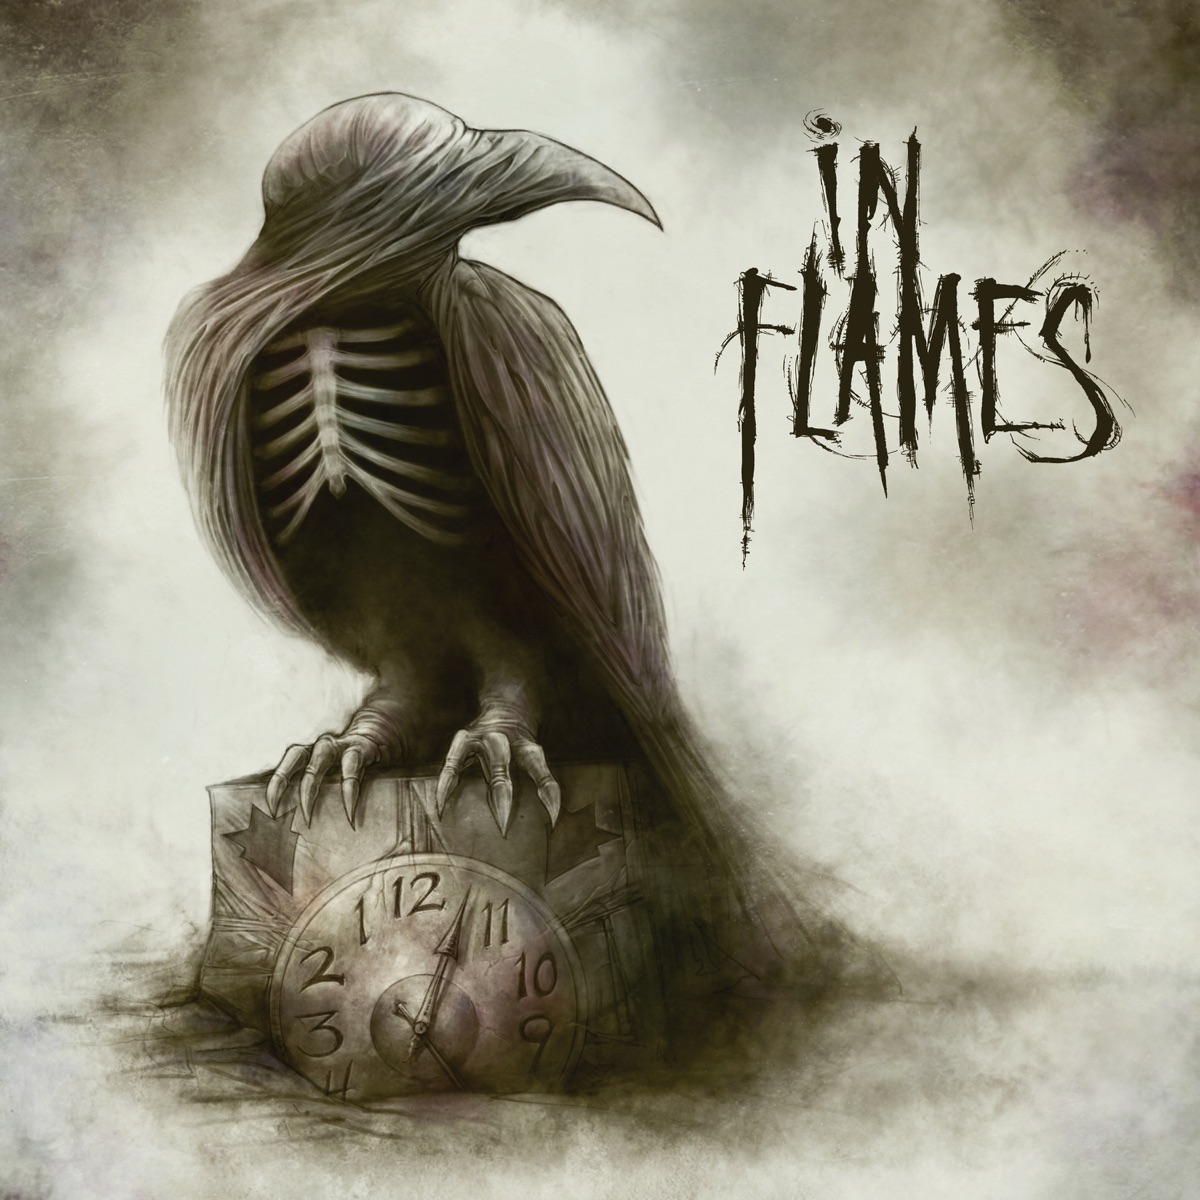 Siren Charms - Album by In Flames - Apple Music